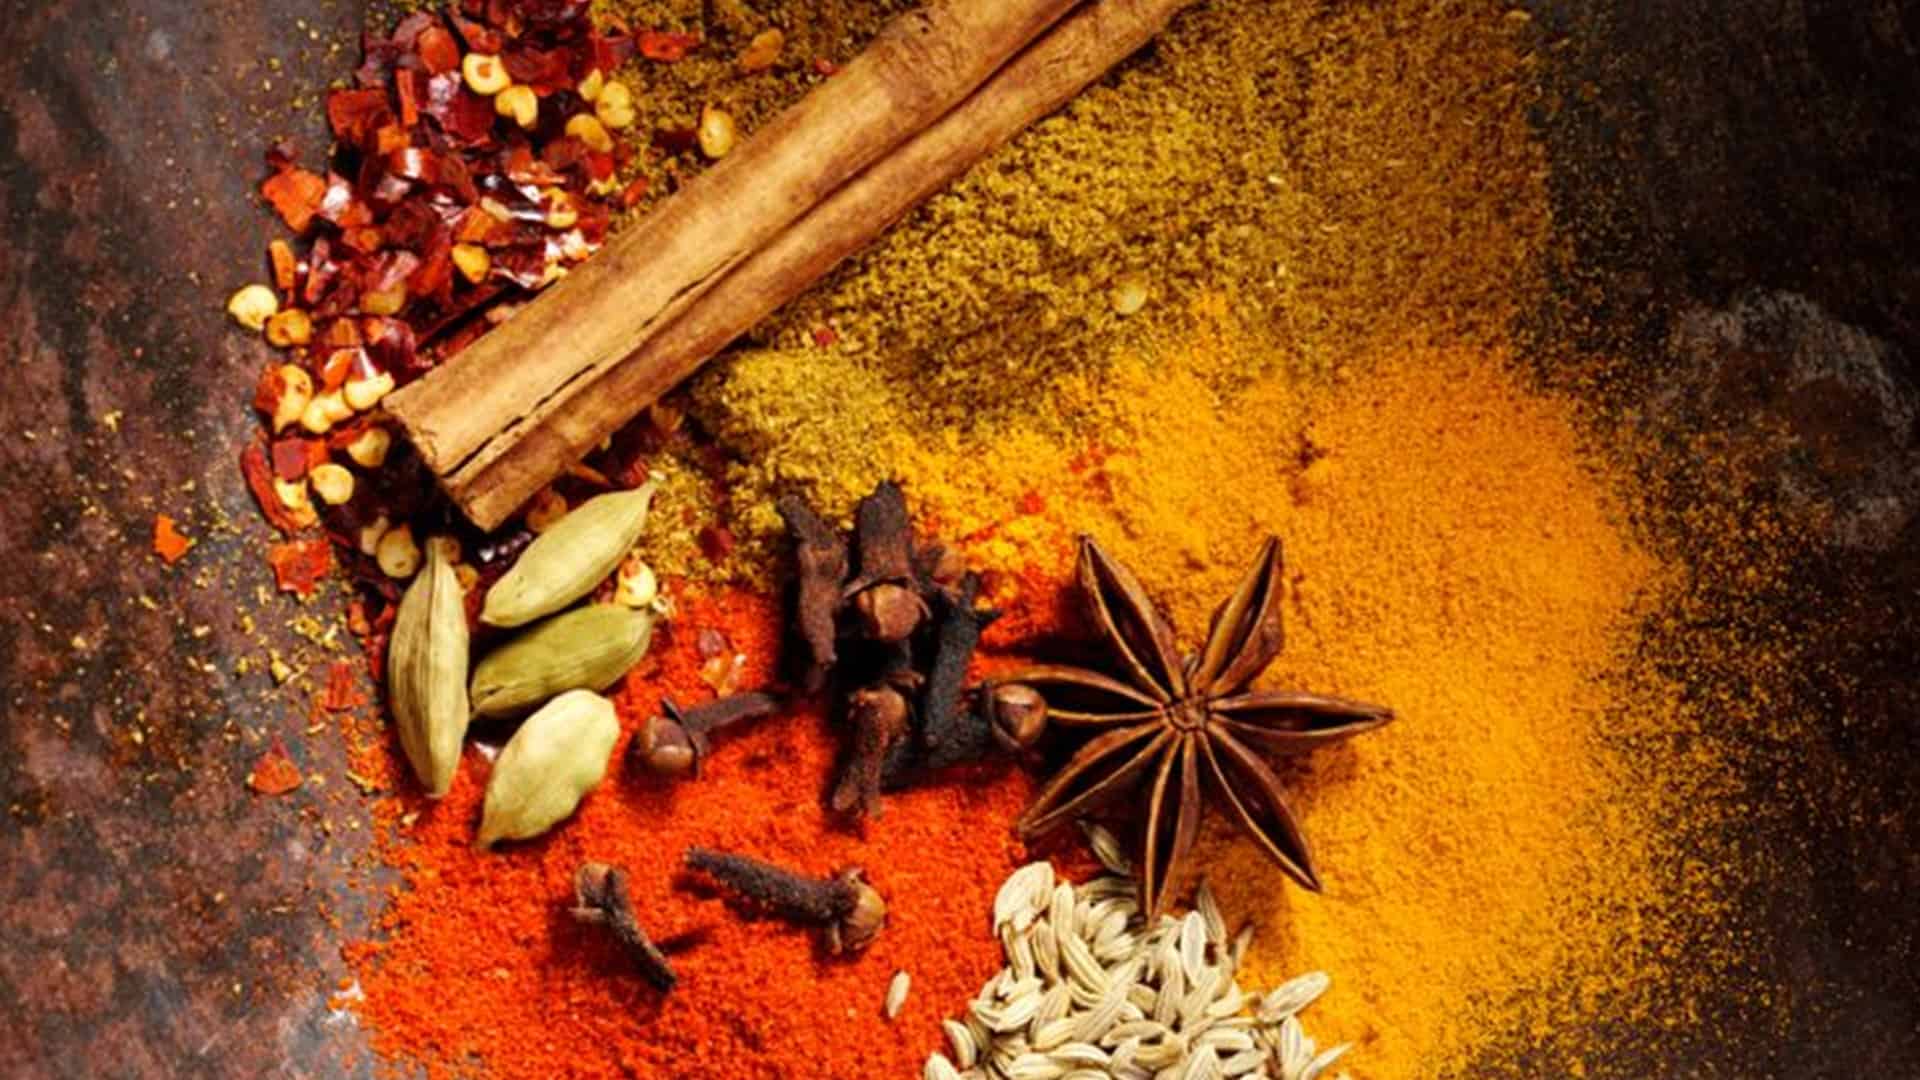 Spice Indian Spices Hd - 1920x1080 Wallpaper 